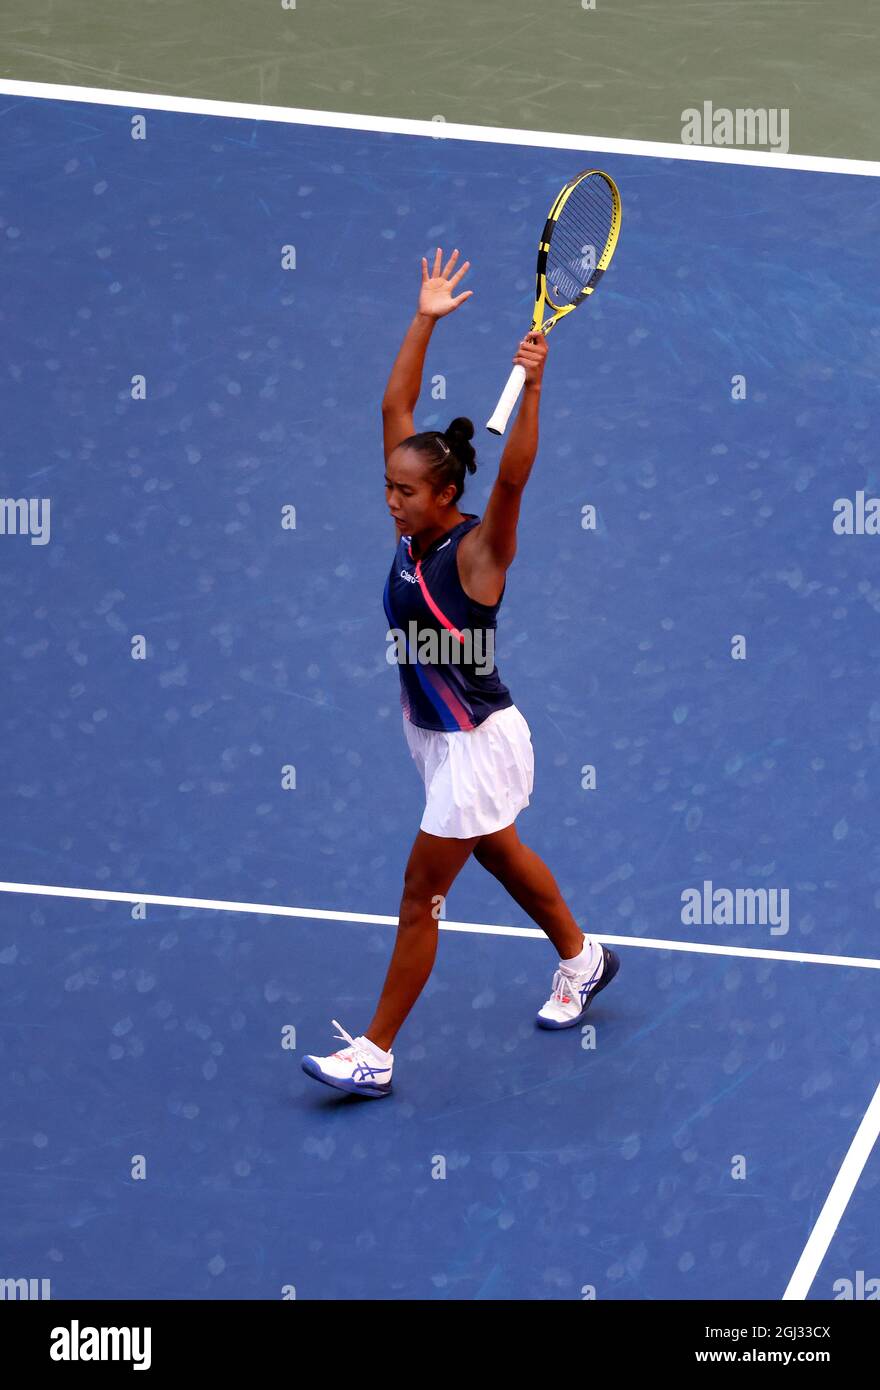 New York City, United States. 07th Sep, 2021. Flushing Meadows, New York - September 07, 2021: New York: Canada's Leyla Fernandez celebrates point during her quarterfinal upset victory over number 5 seed, Elina Svitolina of Ukraine today at the US Open in Flushing Meadows, New York. Credit: Adam Stoltman/Alamy Live News Stock Photo